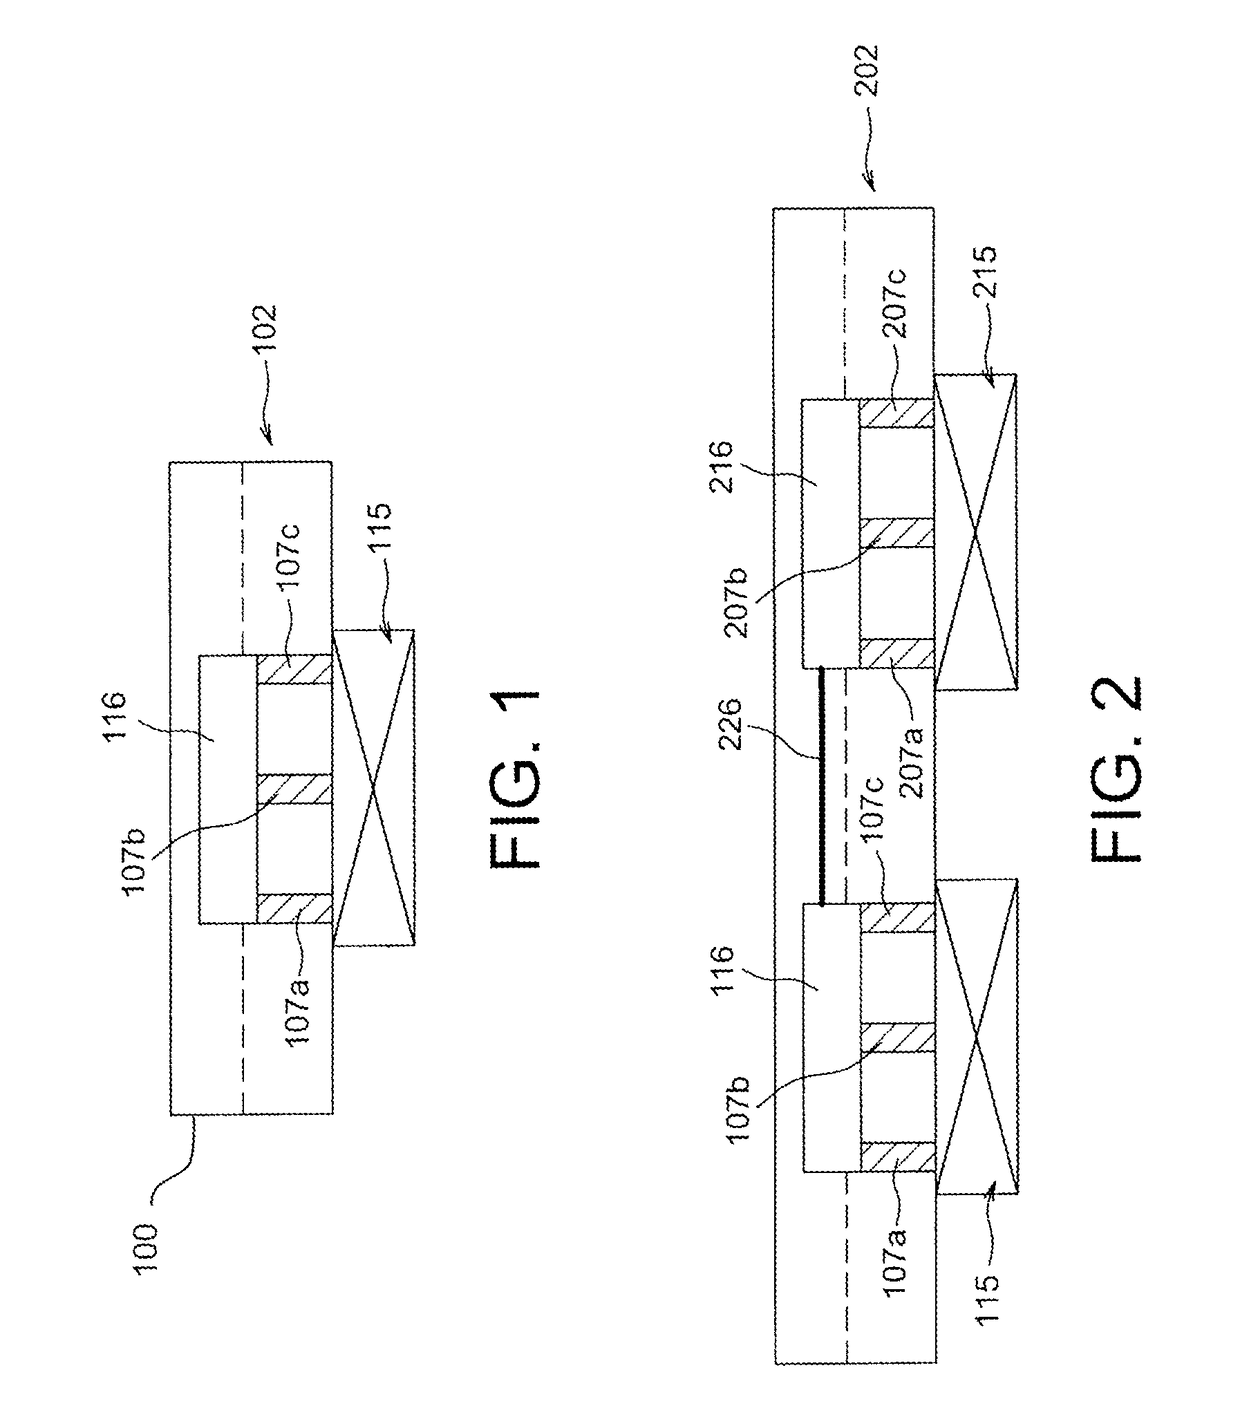 Device for electrically testing the interconnections of a microelectronic device